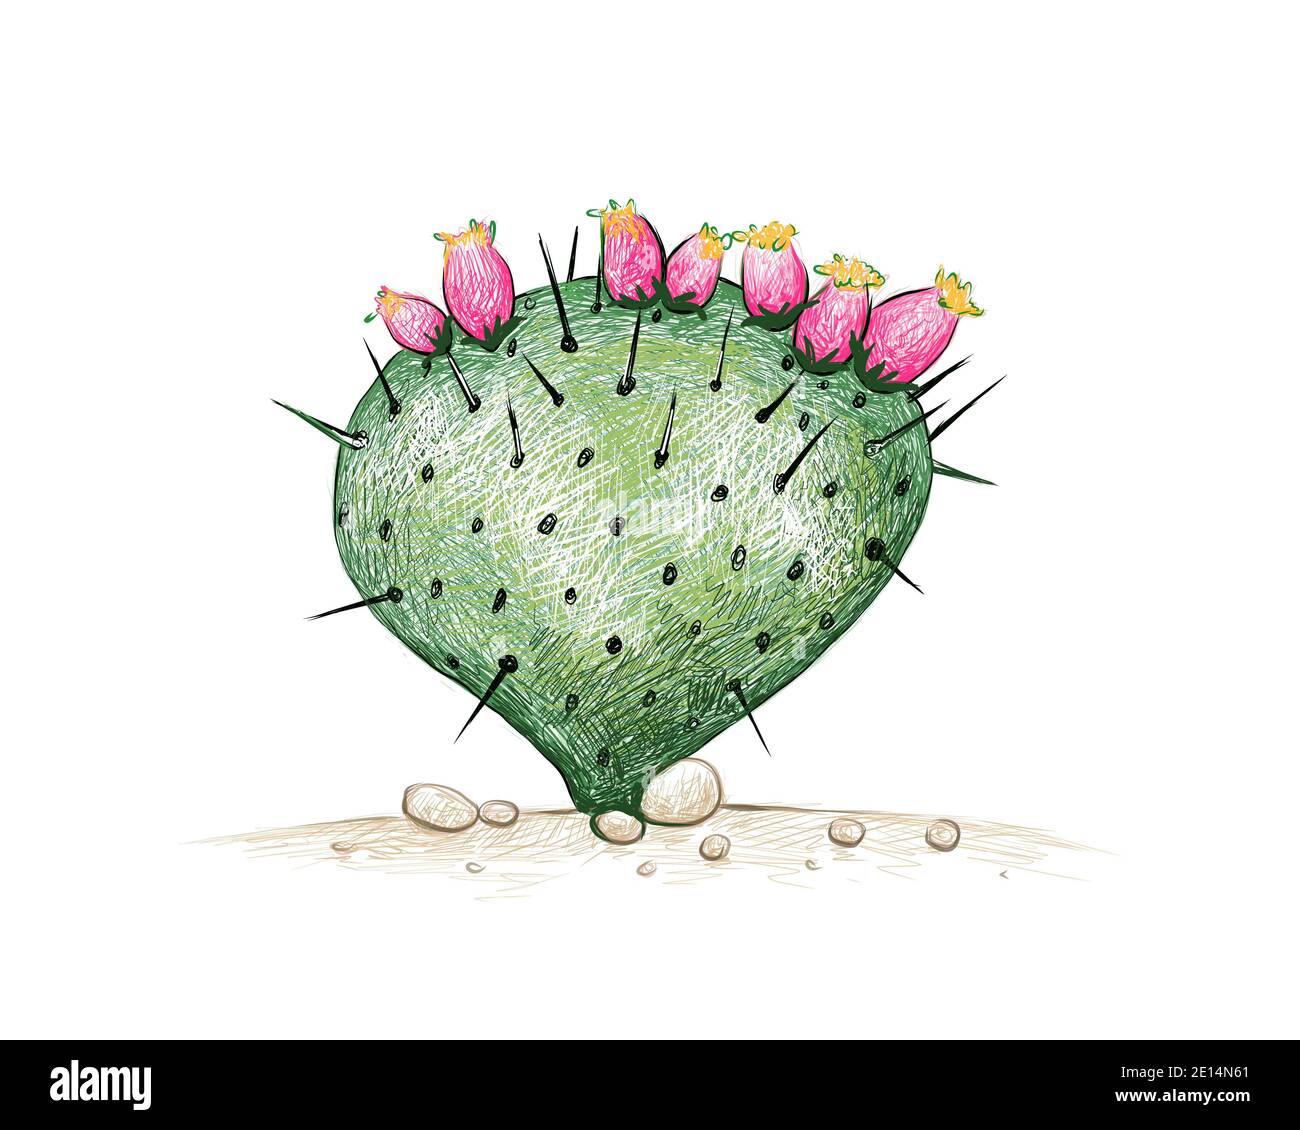 Illustration Hand Drawn Sketch of Opuntia Macrocentra Cactus, Black Spined Pricklypear or Purple Pricklypear. A Succulent Plants with Sharp Thorns for Stock Photo